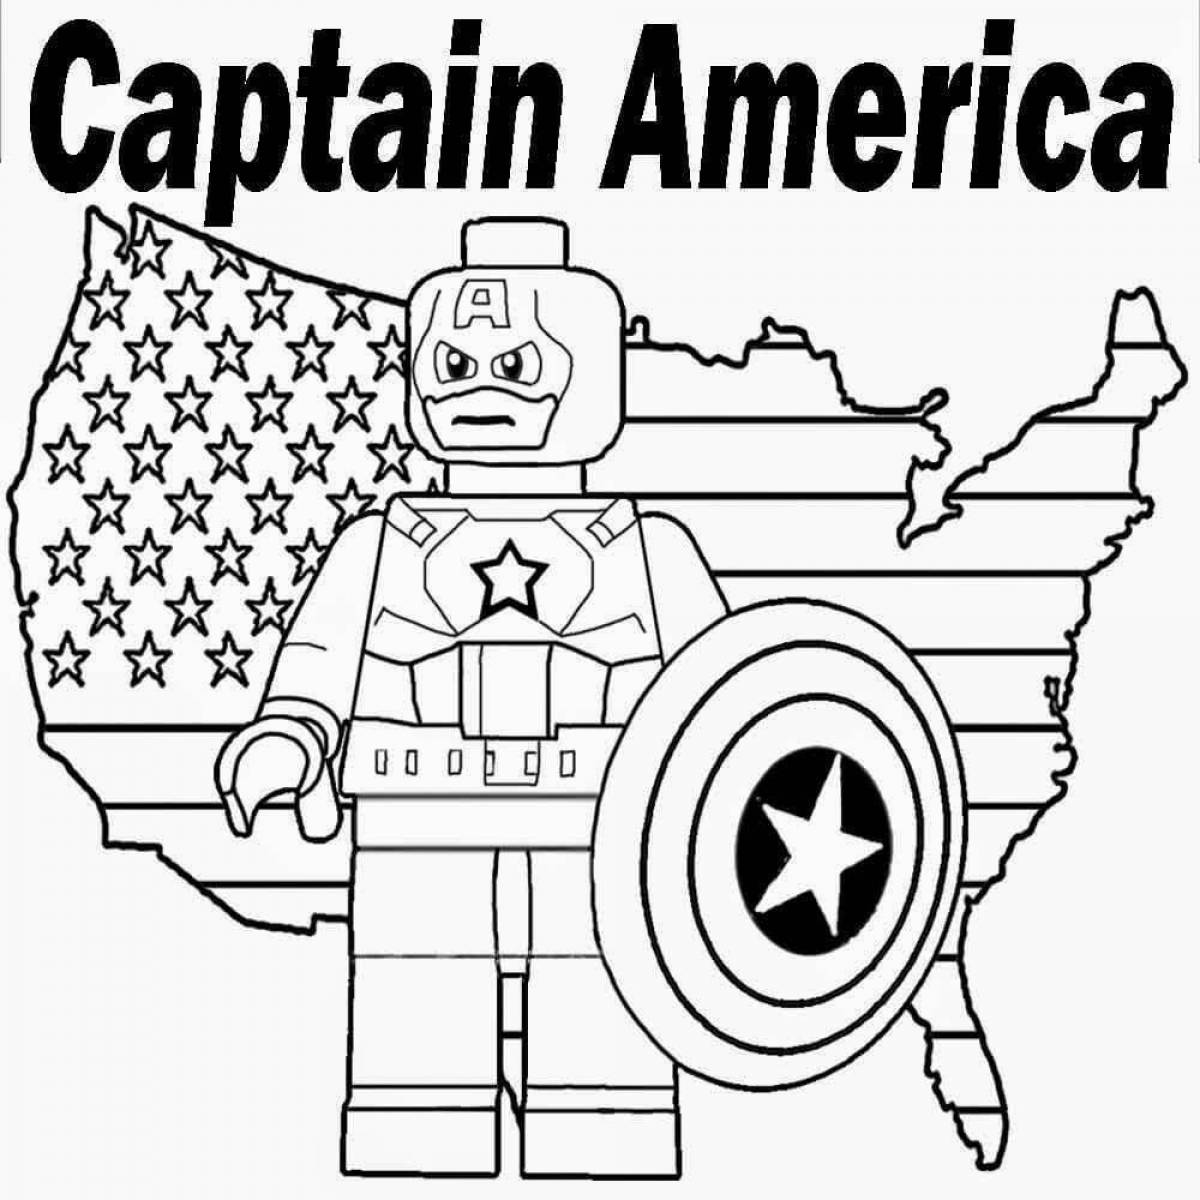 Colorful lego avengers coloring page